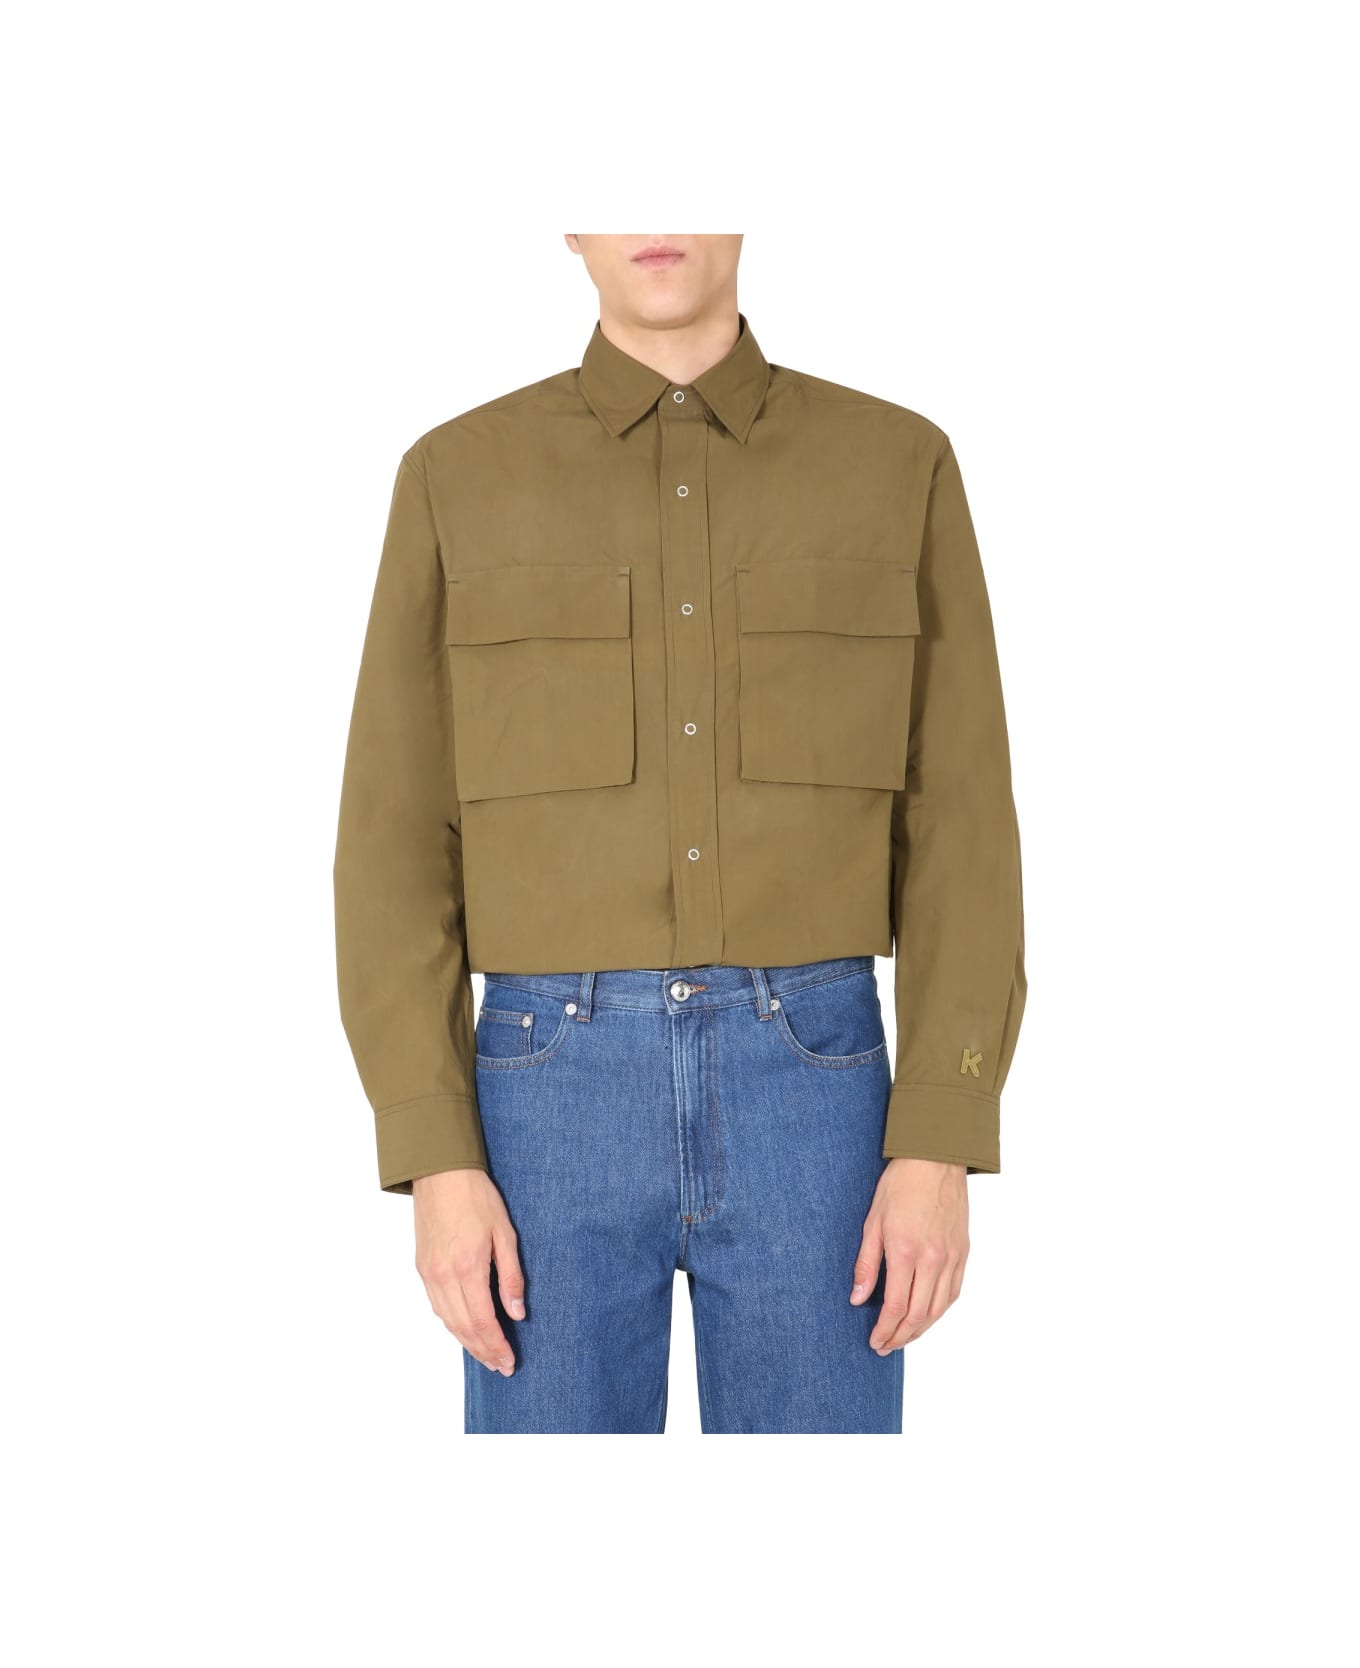 Kenzo Oversize Fit Shirt - BROWN